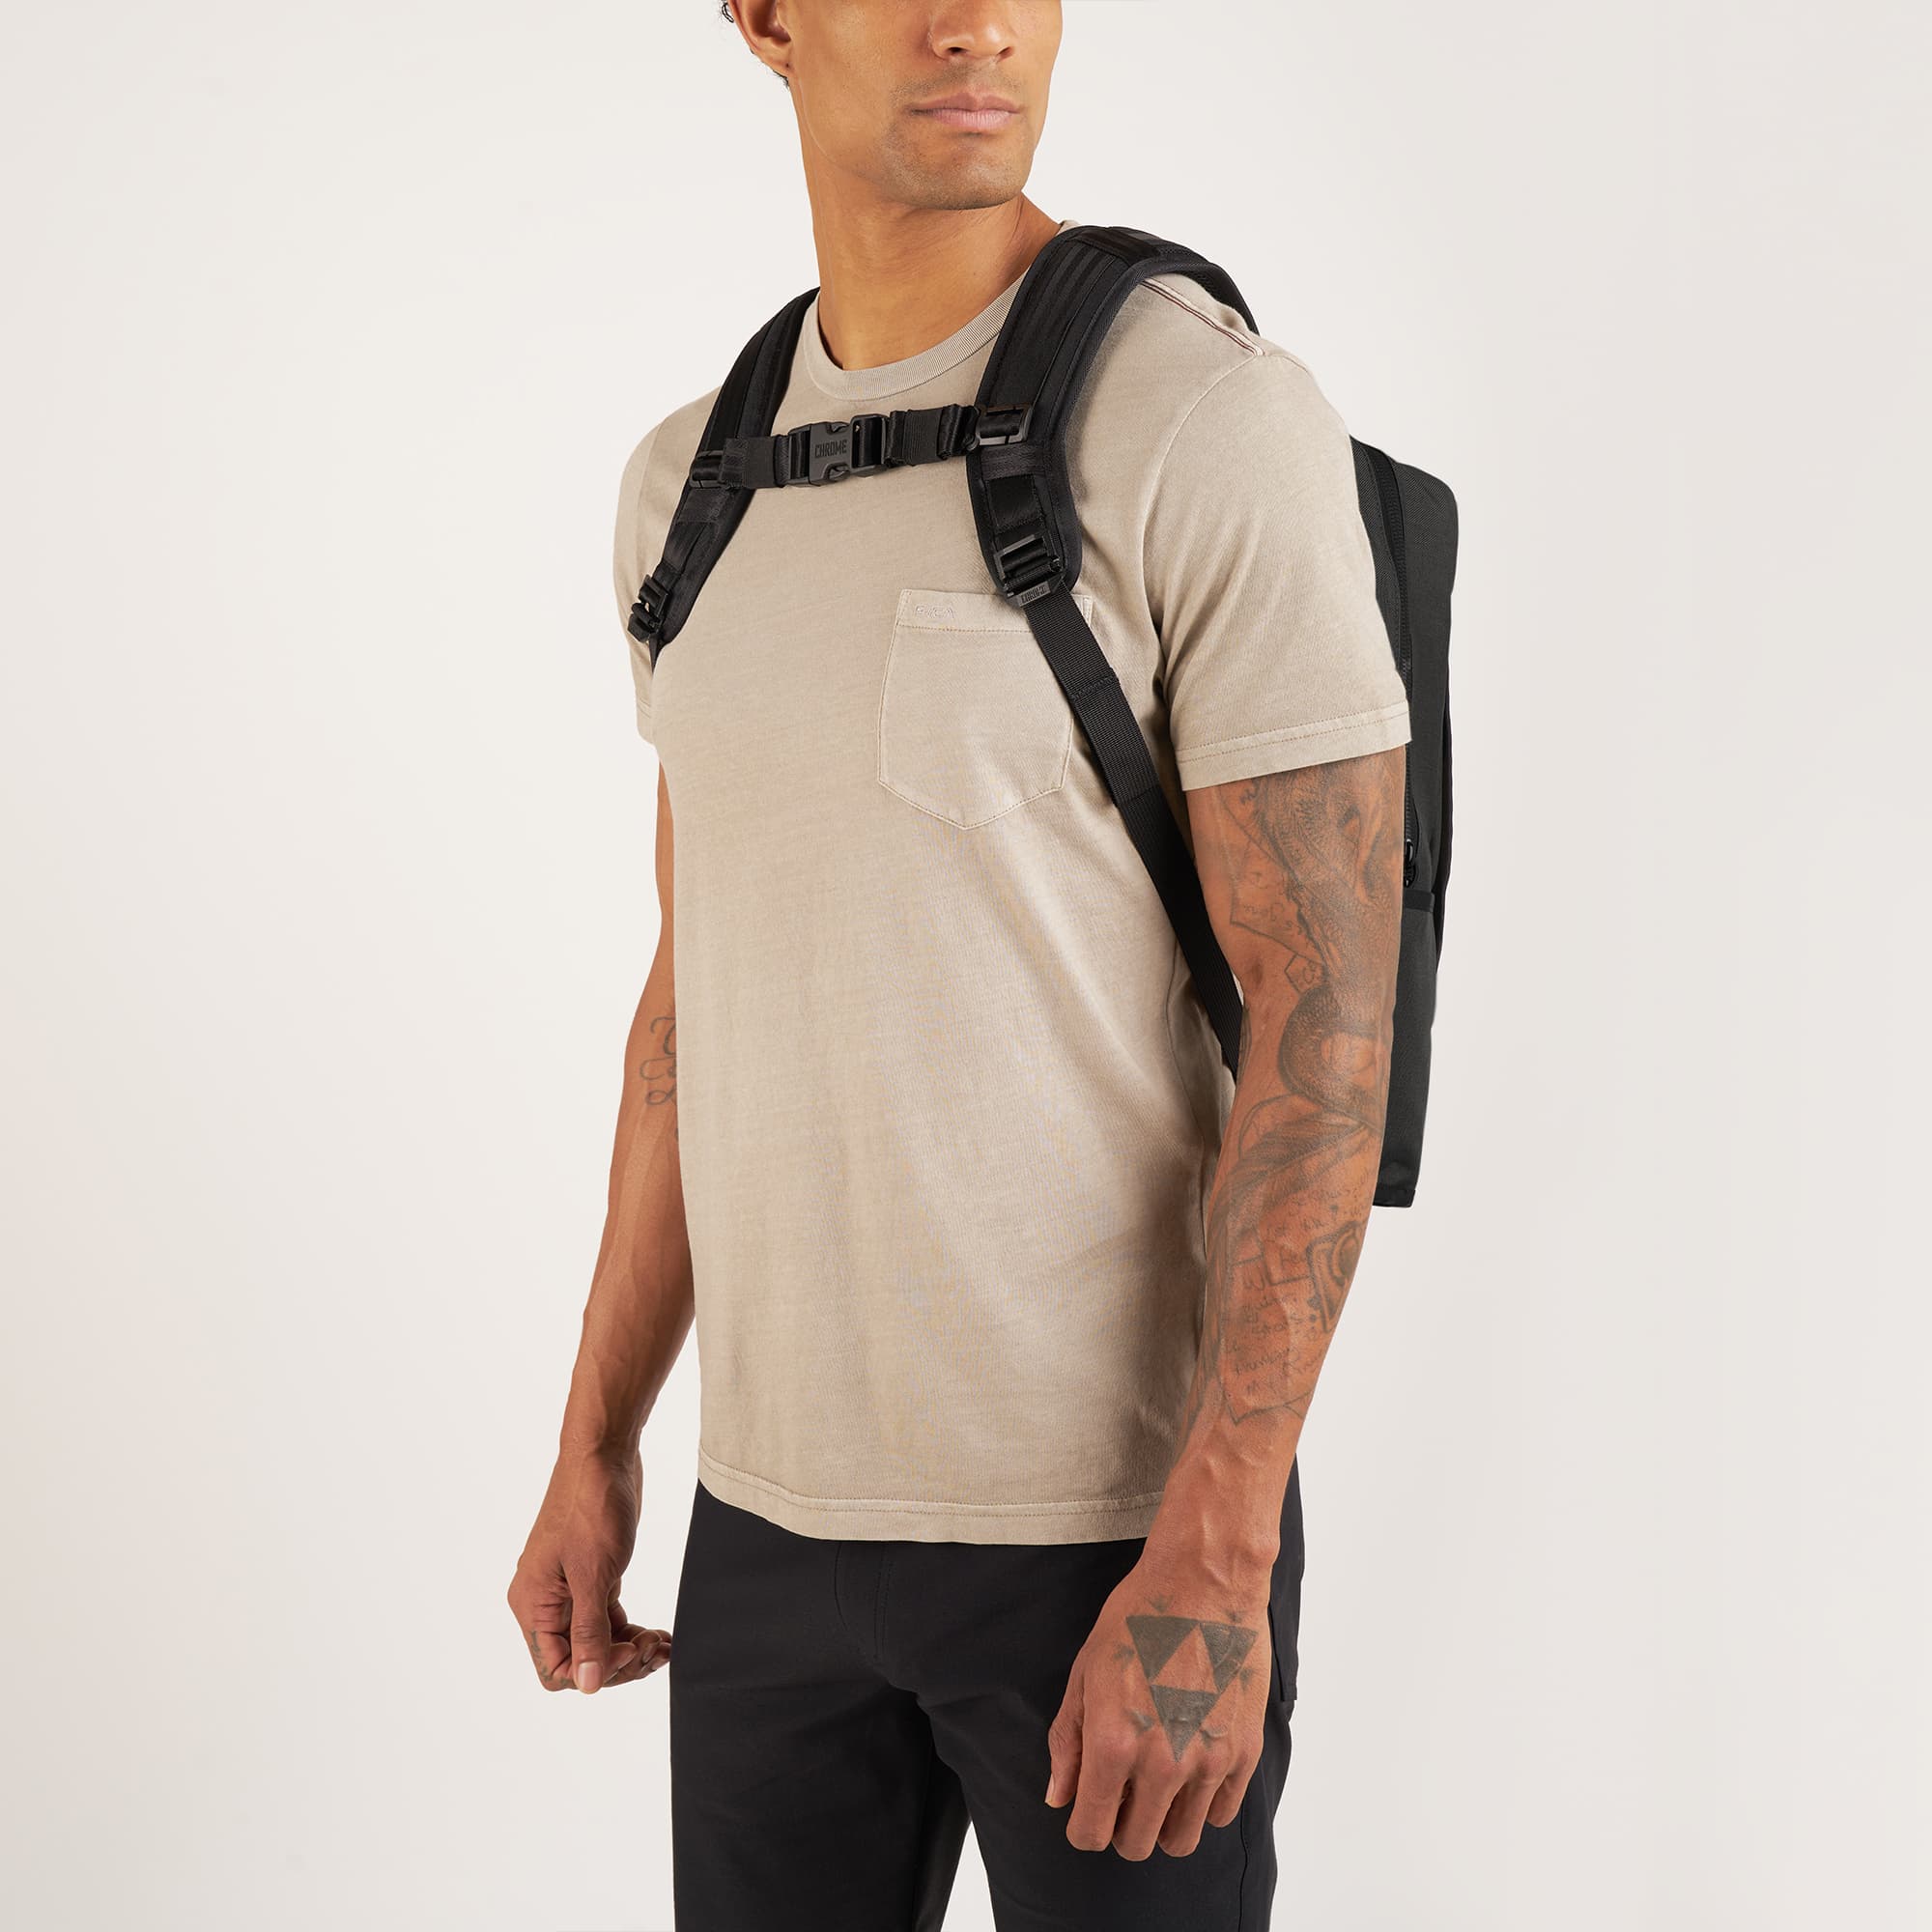 Hondo Daypack in black worn by a man front view